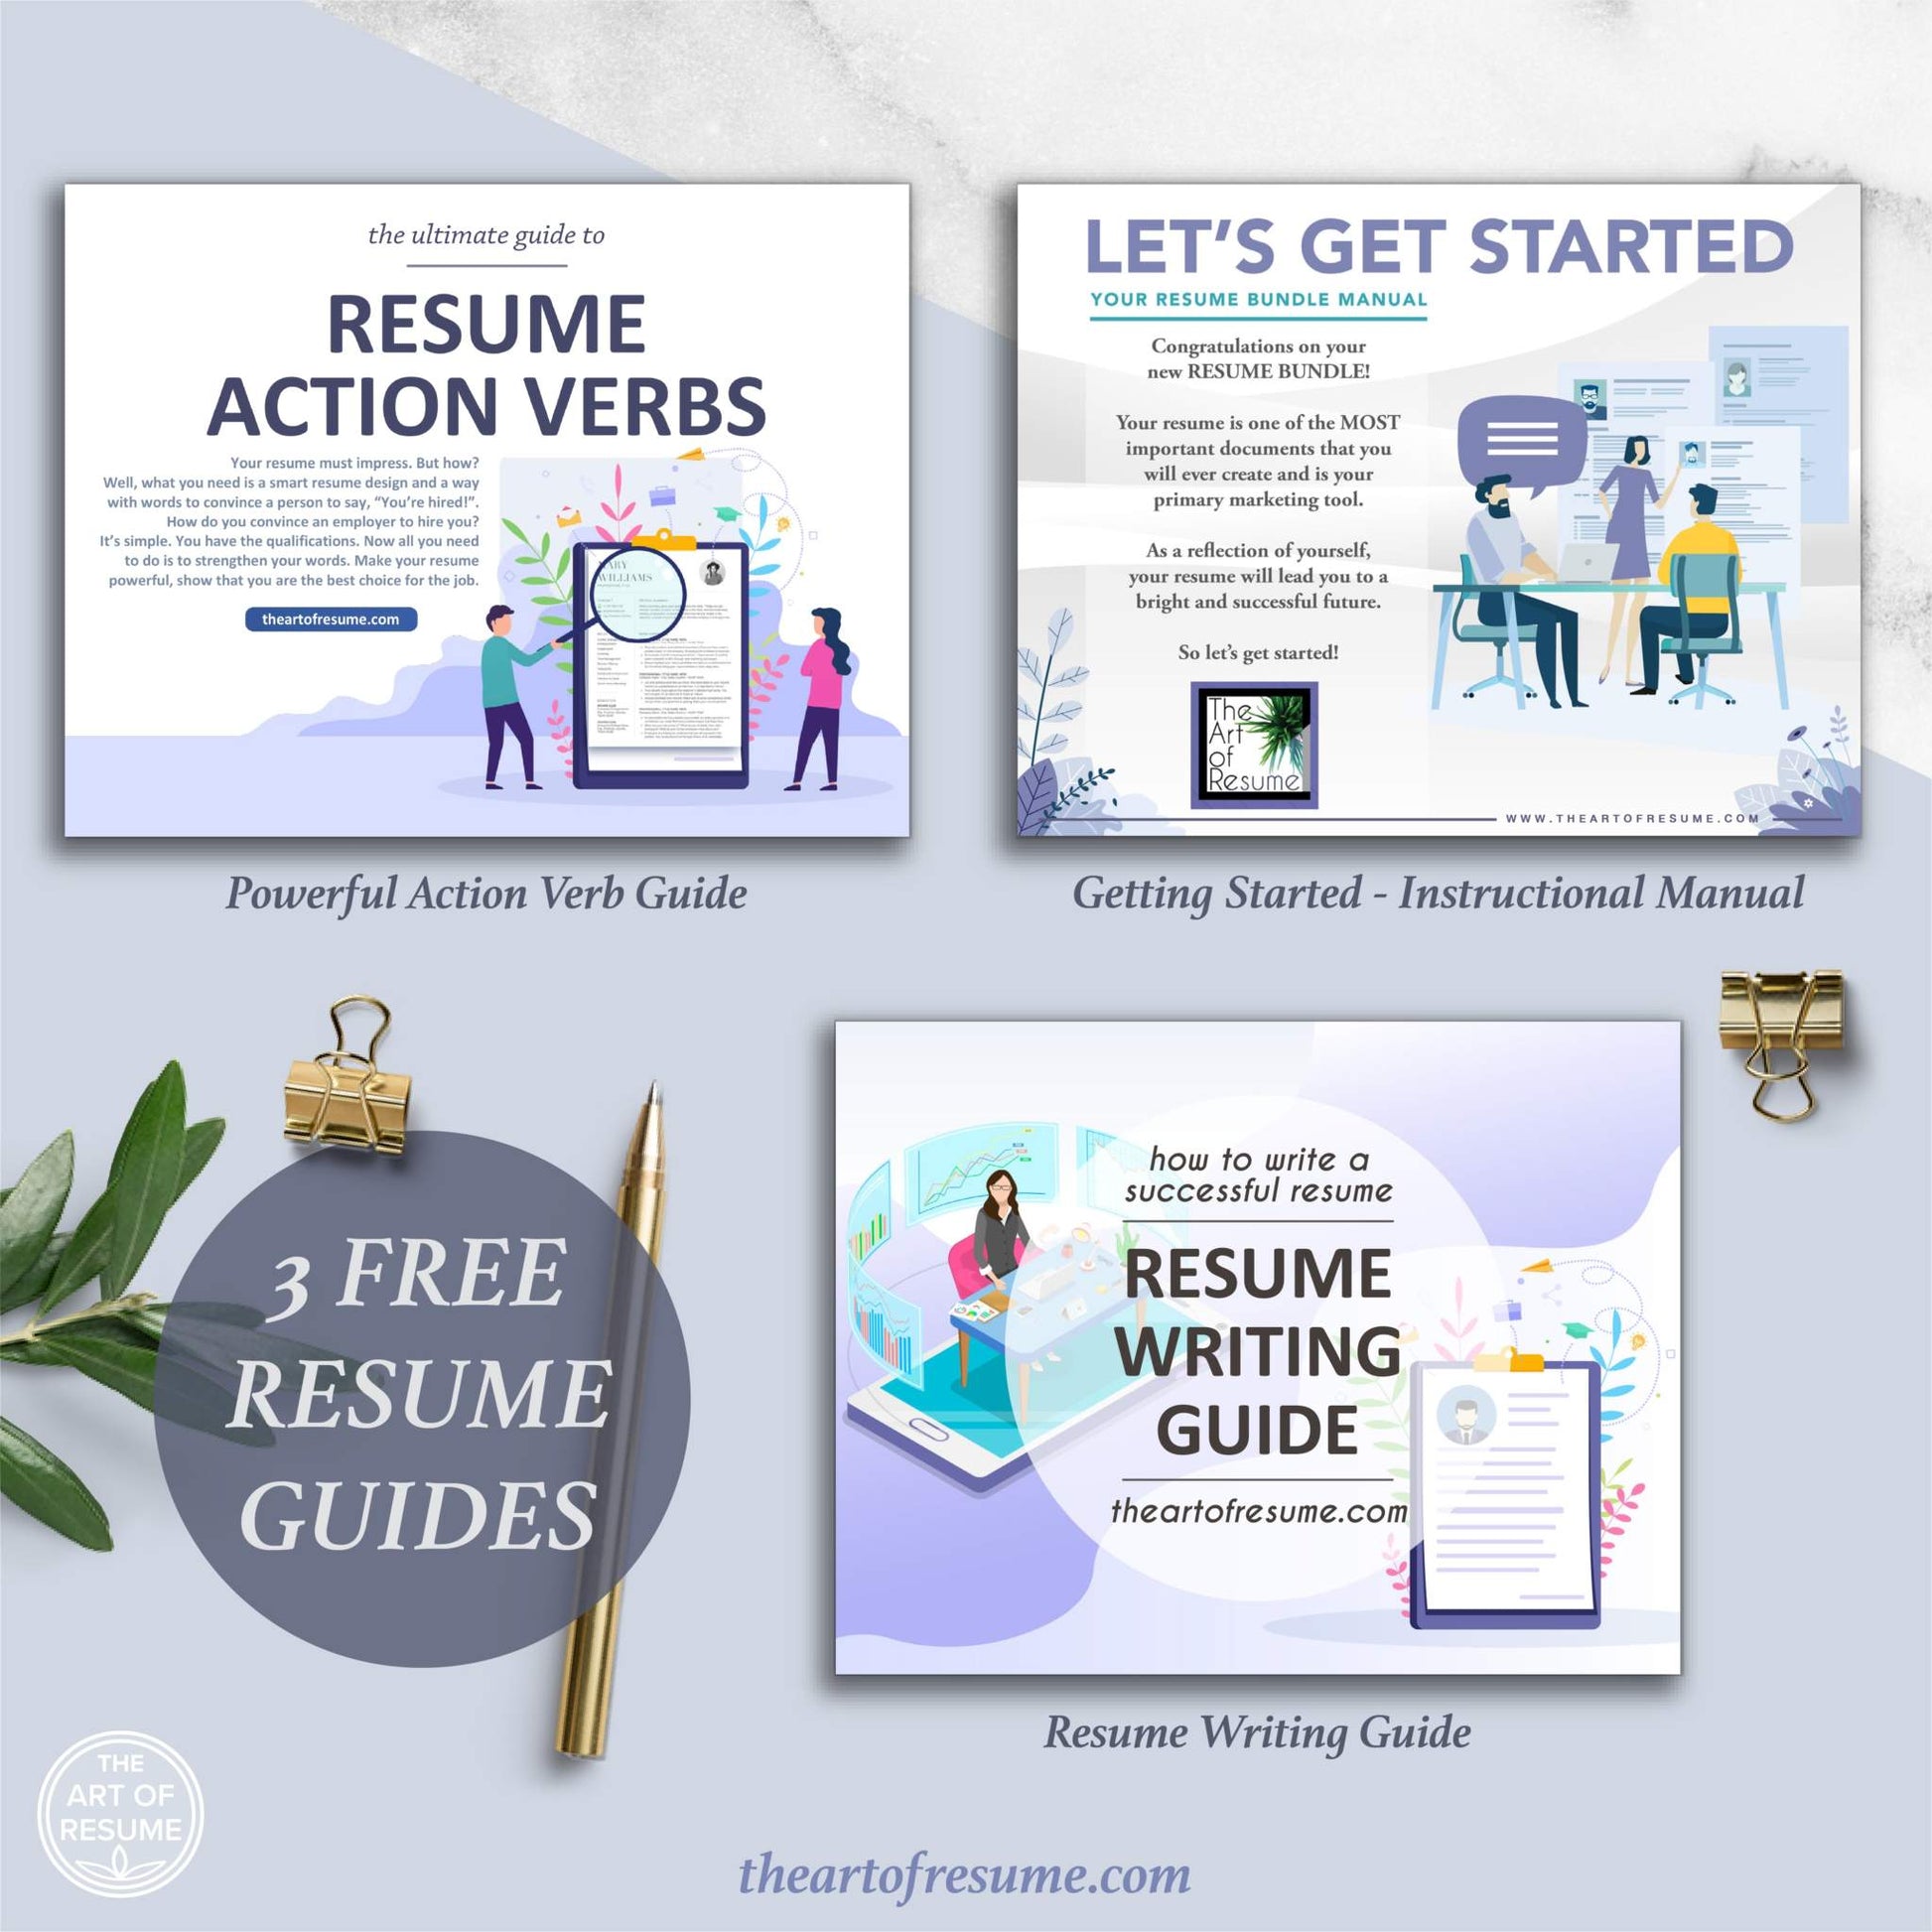 The Art of Resume Guides: Your Bundle Includes Free Resume Writing Guide, Resume Action Verb Guide, Resume Template Instructional Manual